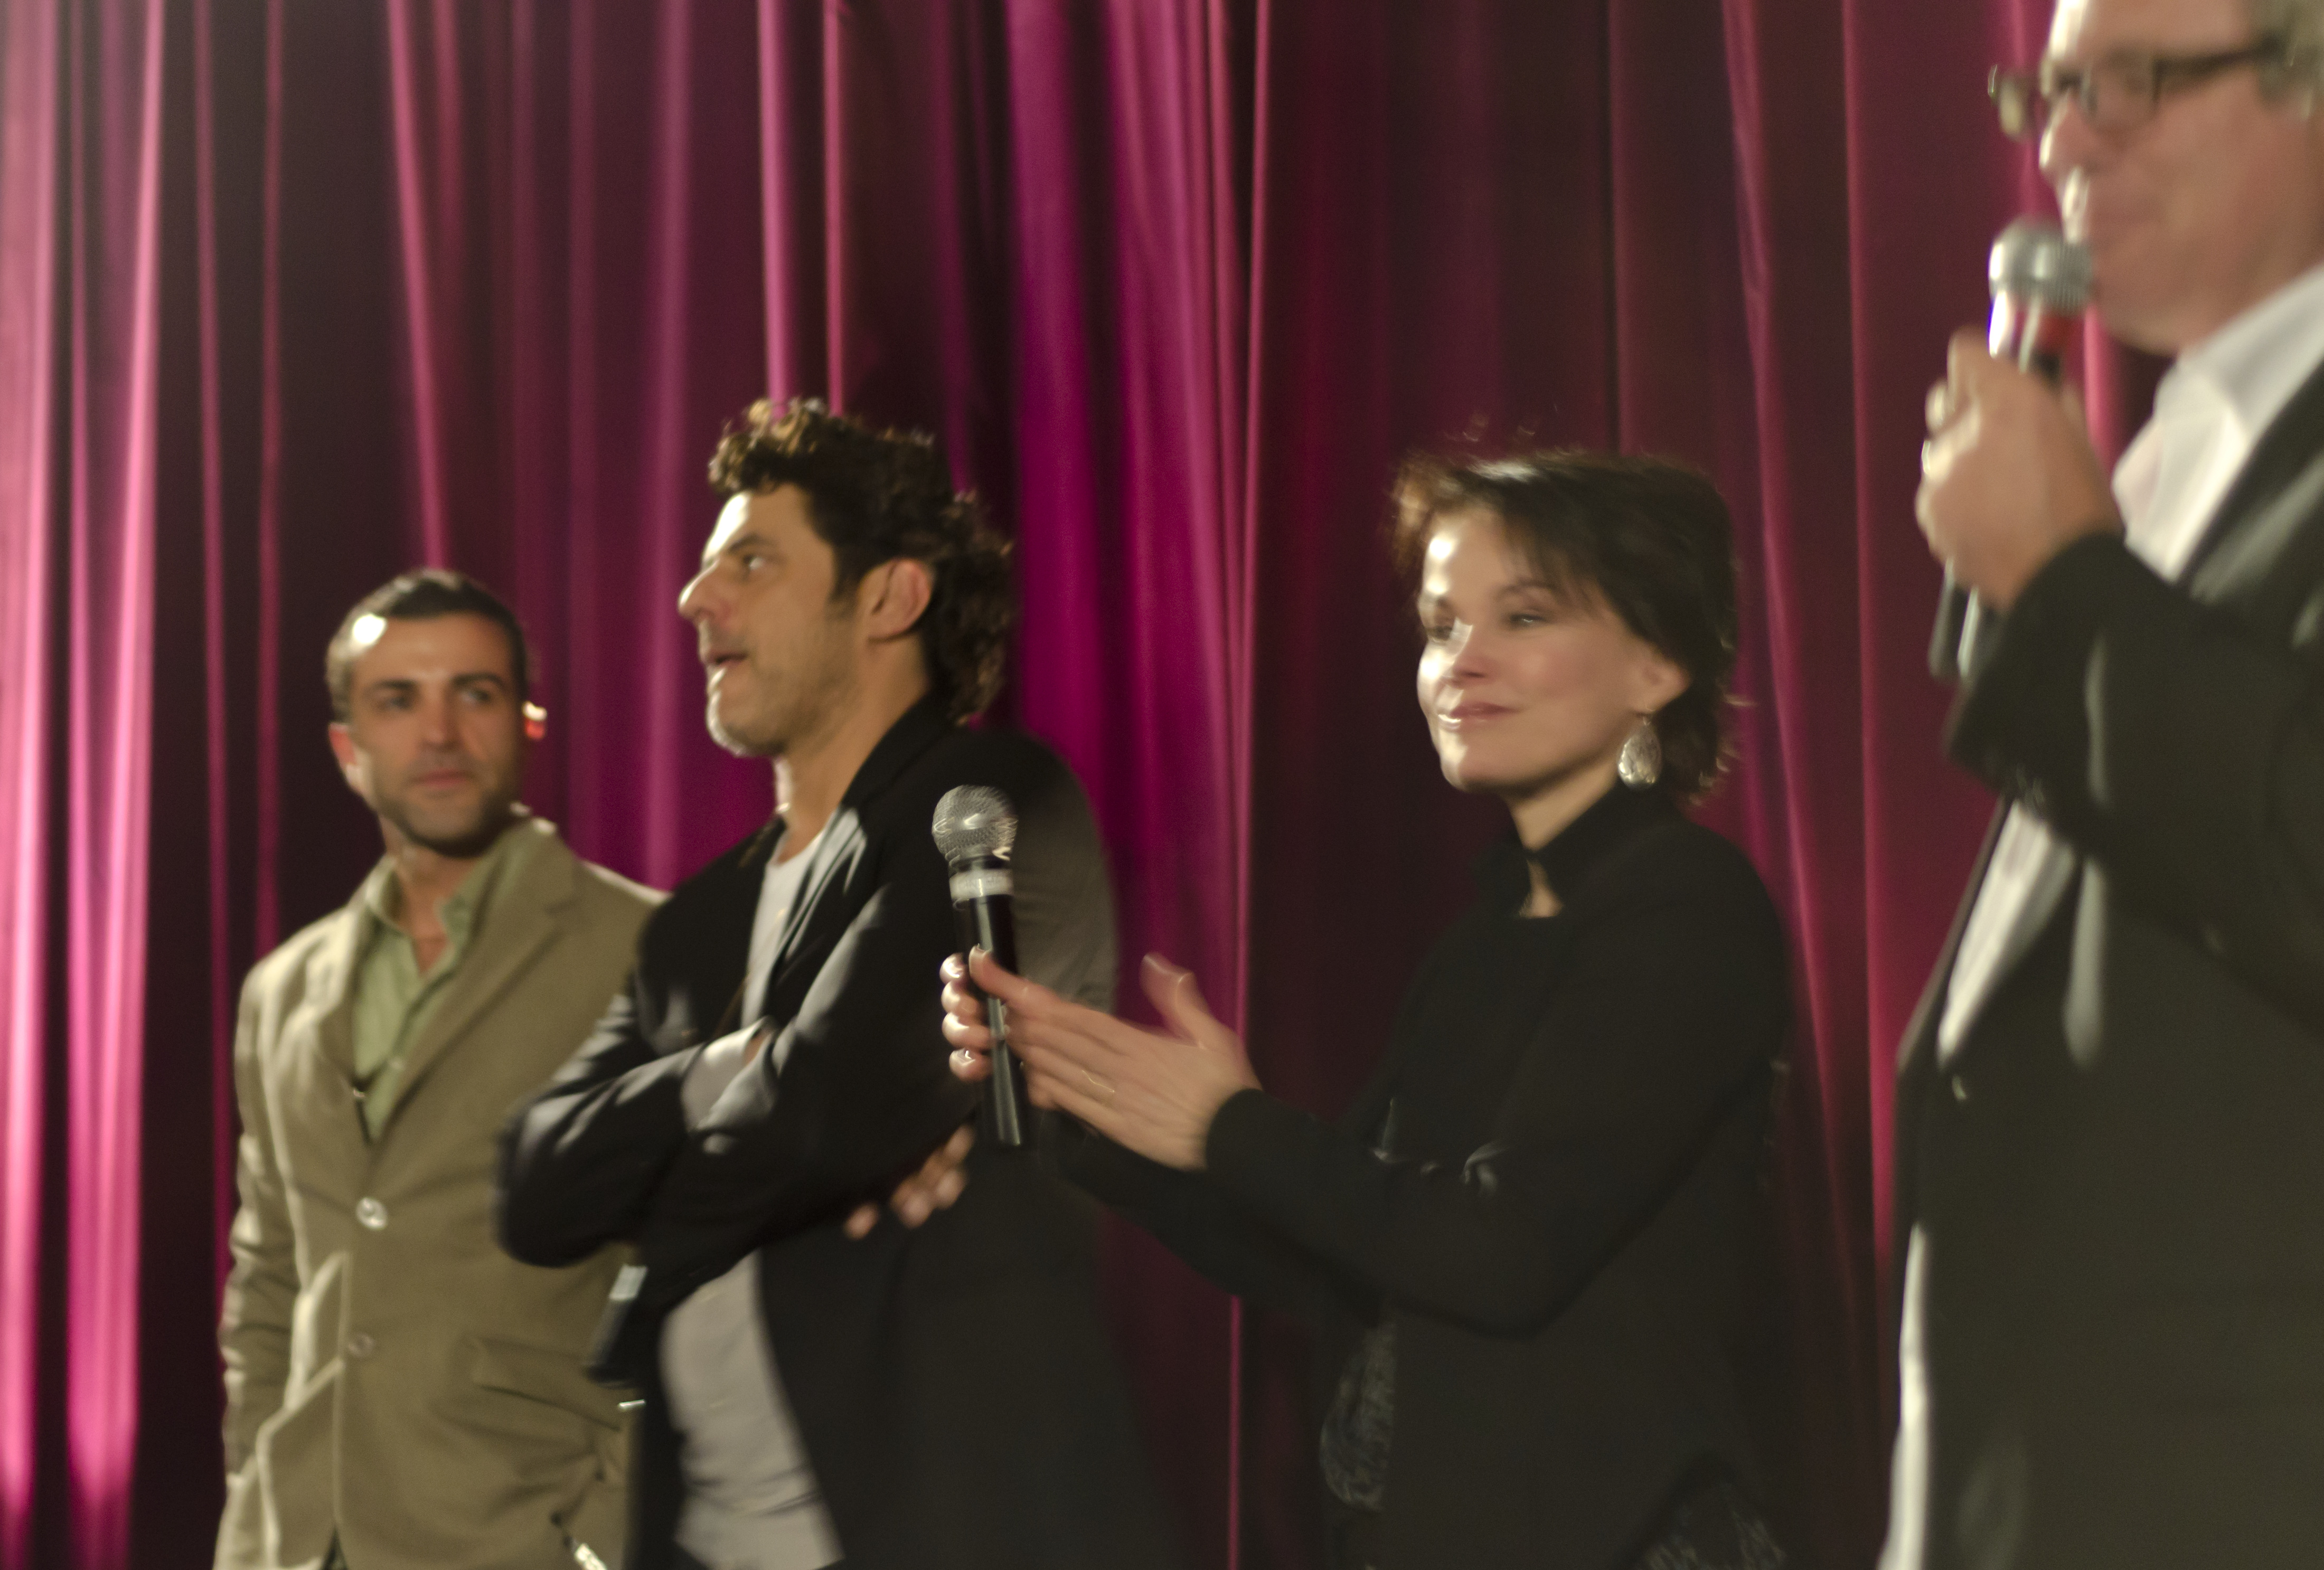 DIRECTOR MICHAEL RYMER with ROBERT RABIAH, VINCE COLOSIMO & SIGRID THORNTON - Film Screening - Questions & Answers.....